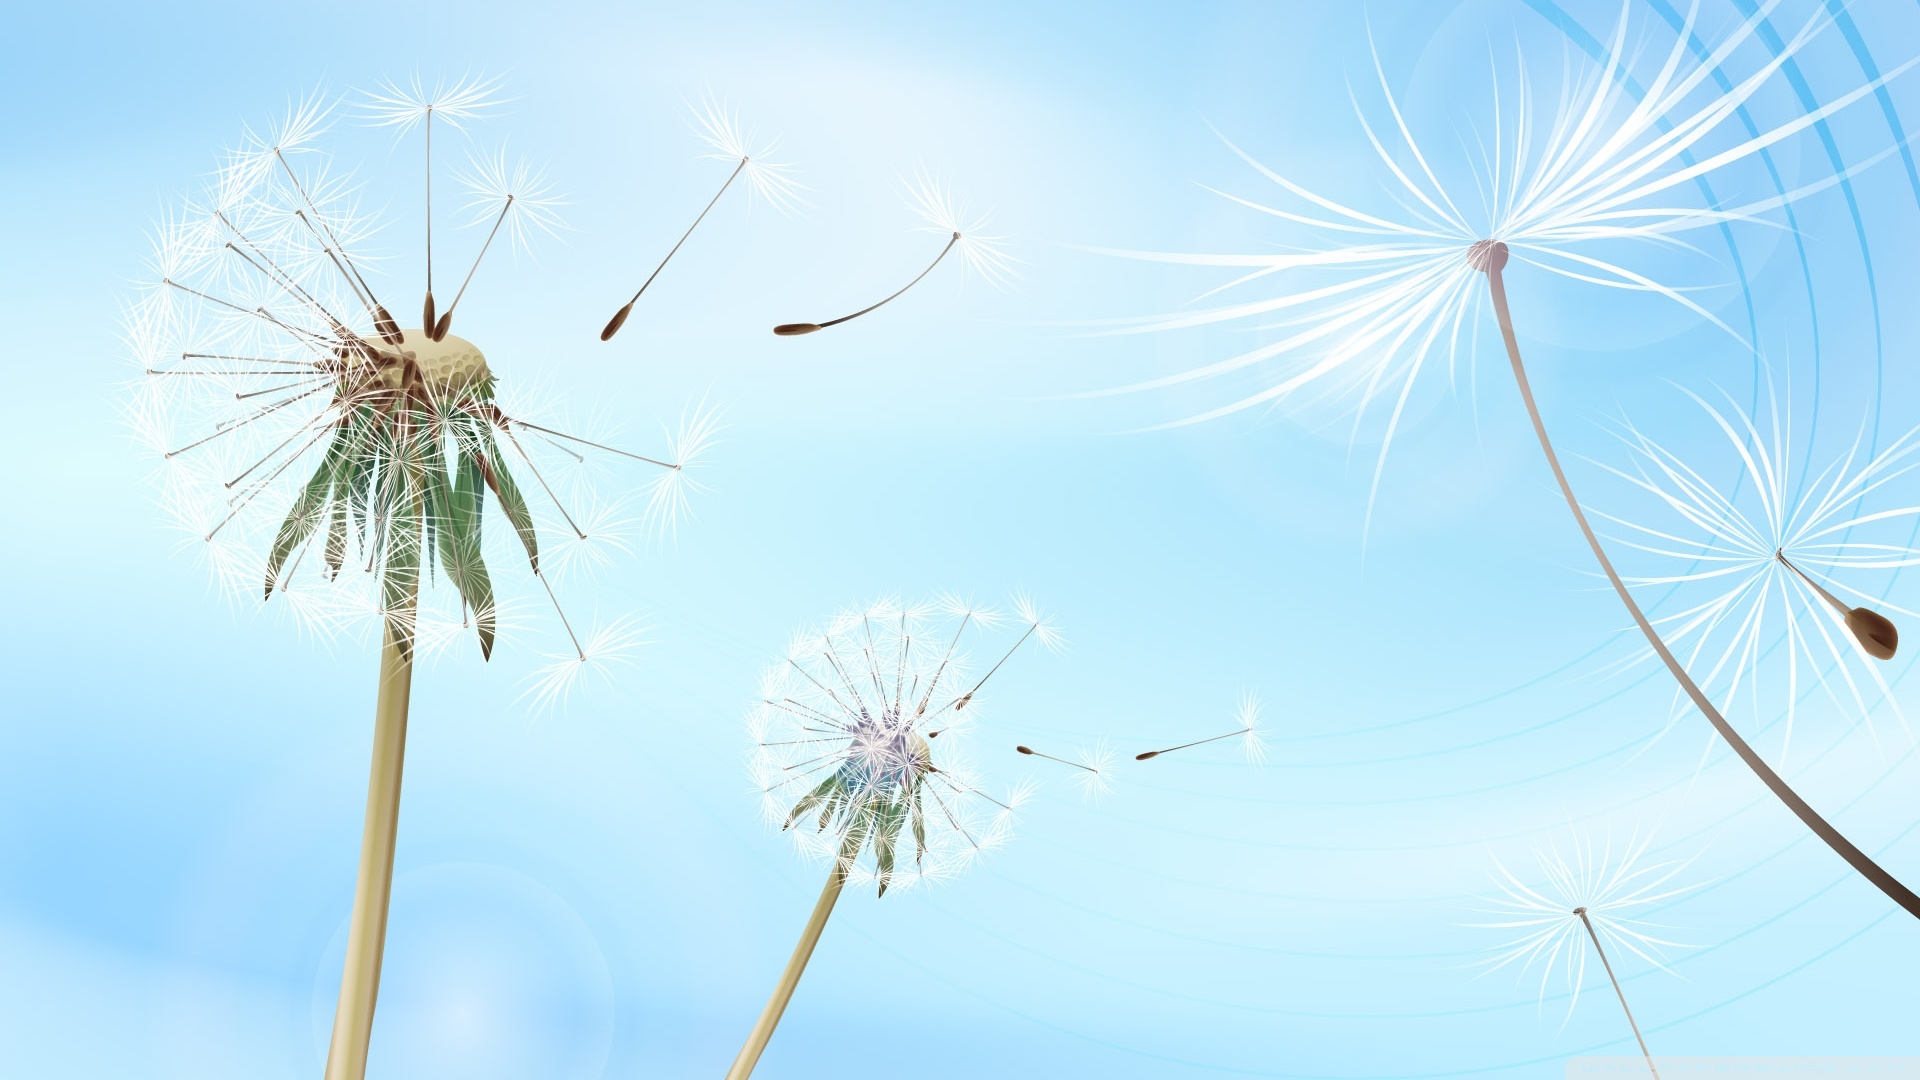 Dandelion Blowing Drawing at GetDrawings.com | Free for personal use ...